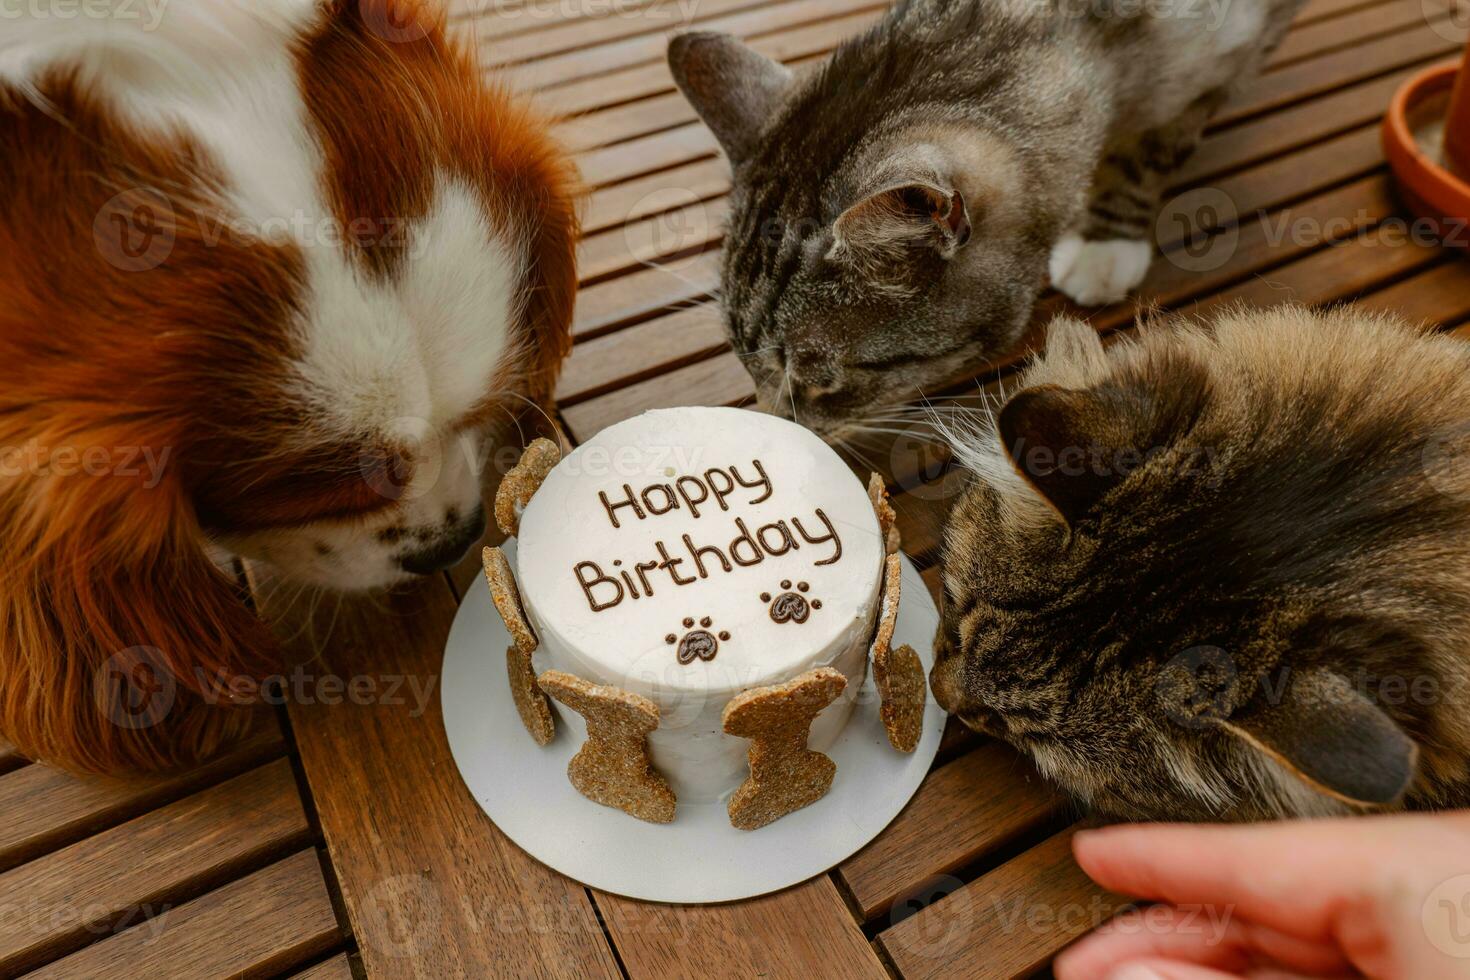 Animal's birthday party. Dog and cats celebrate birthday. Cake for pet made of cookies in shape of meat bones. photo